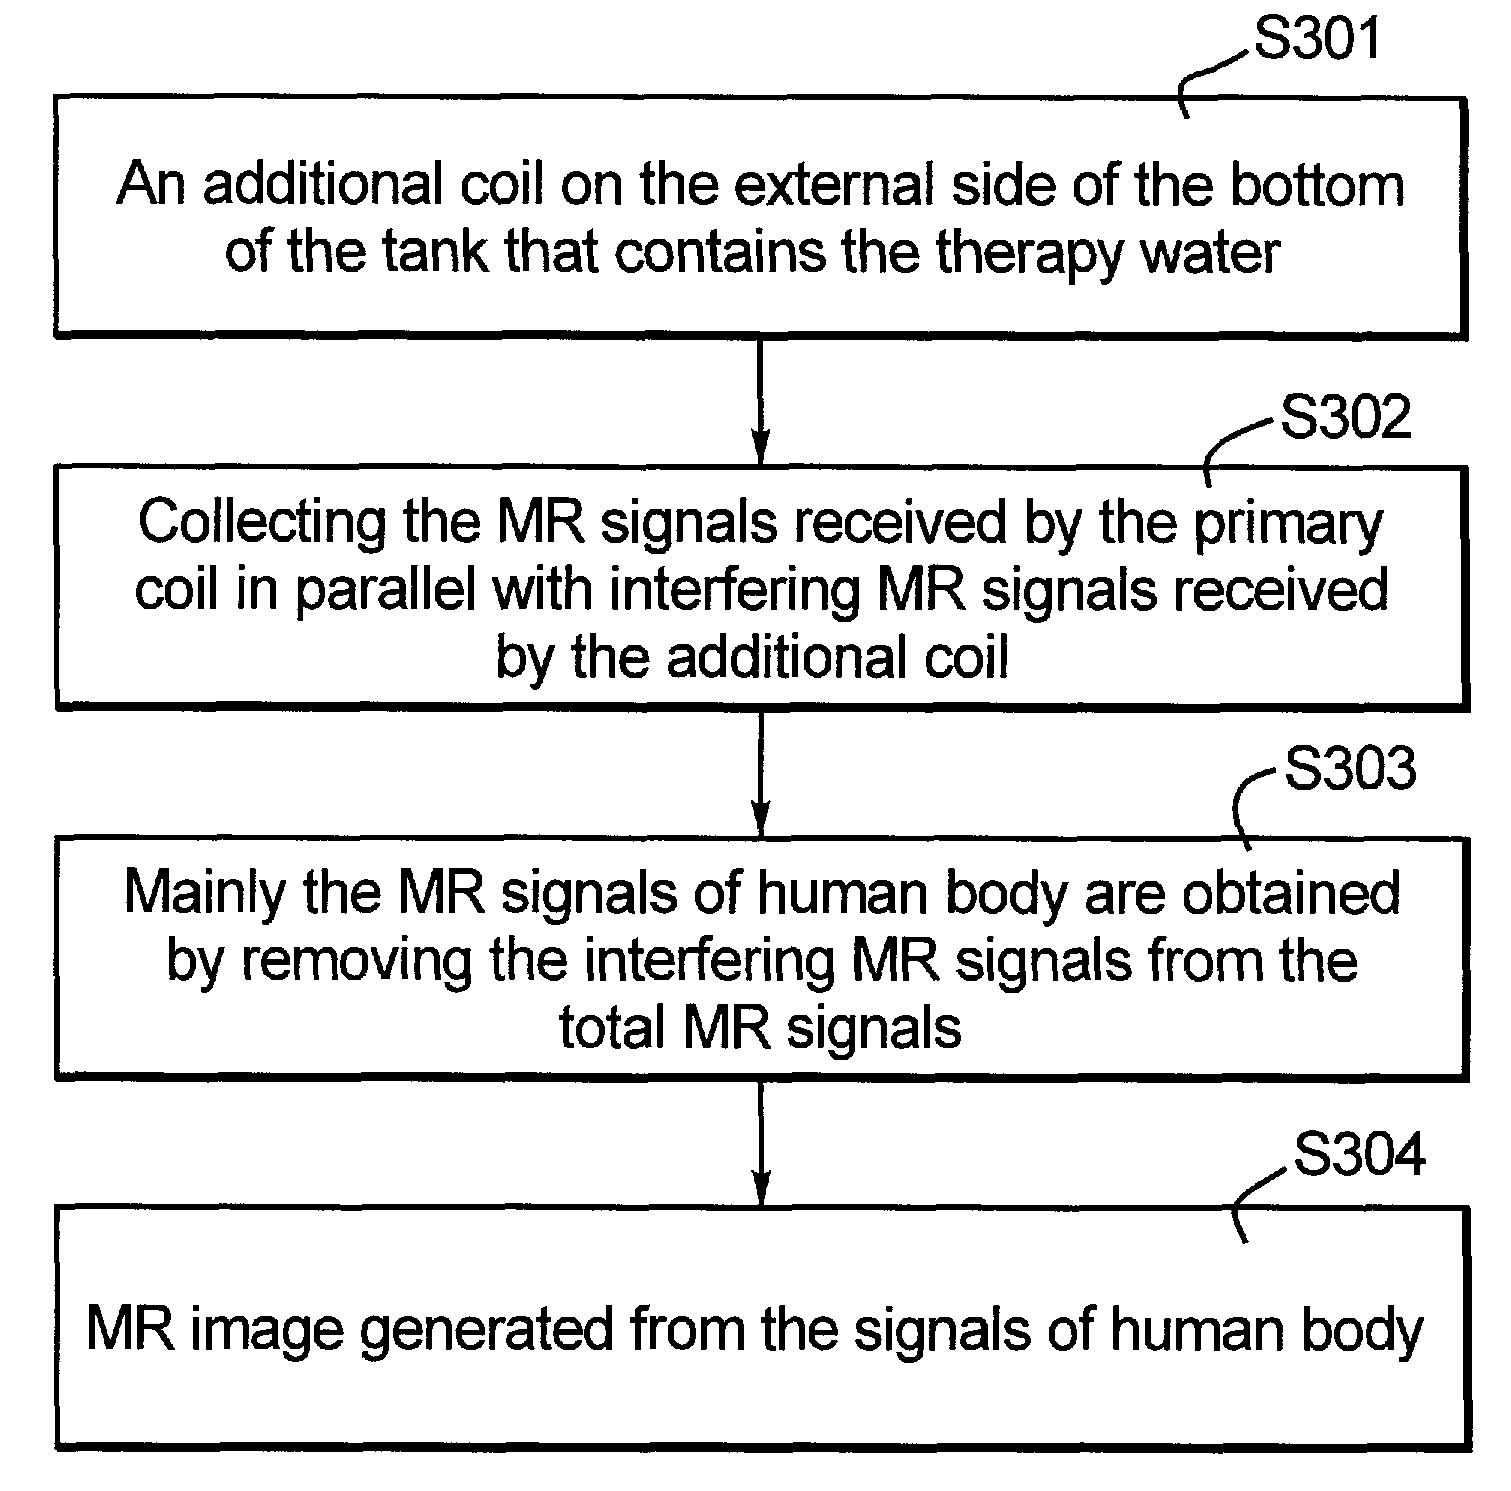 Method and apparatus for reducing aliasing artifacts in the imaging for MR-monitored HIFU therapy